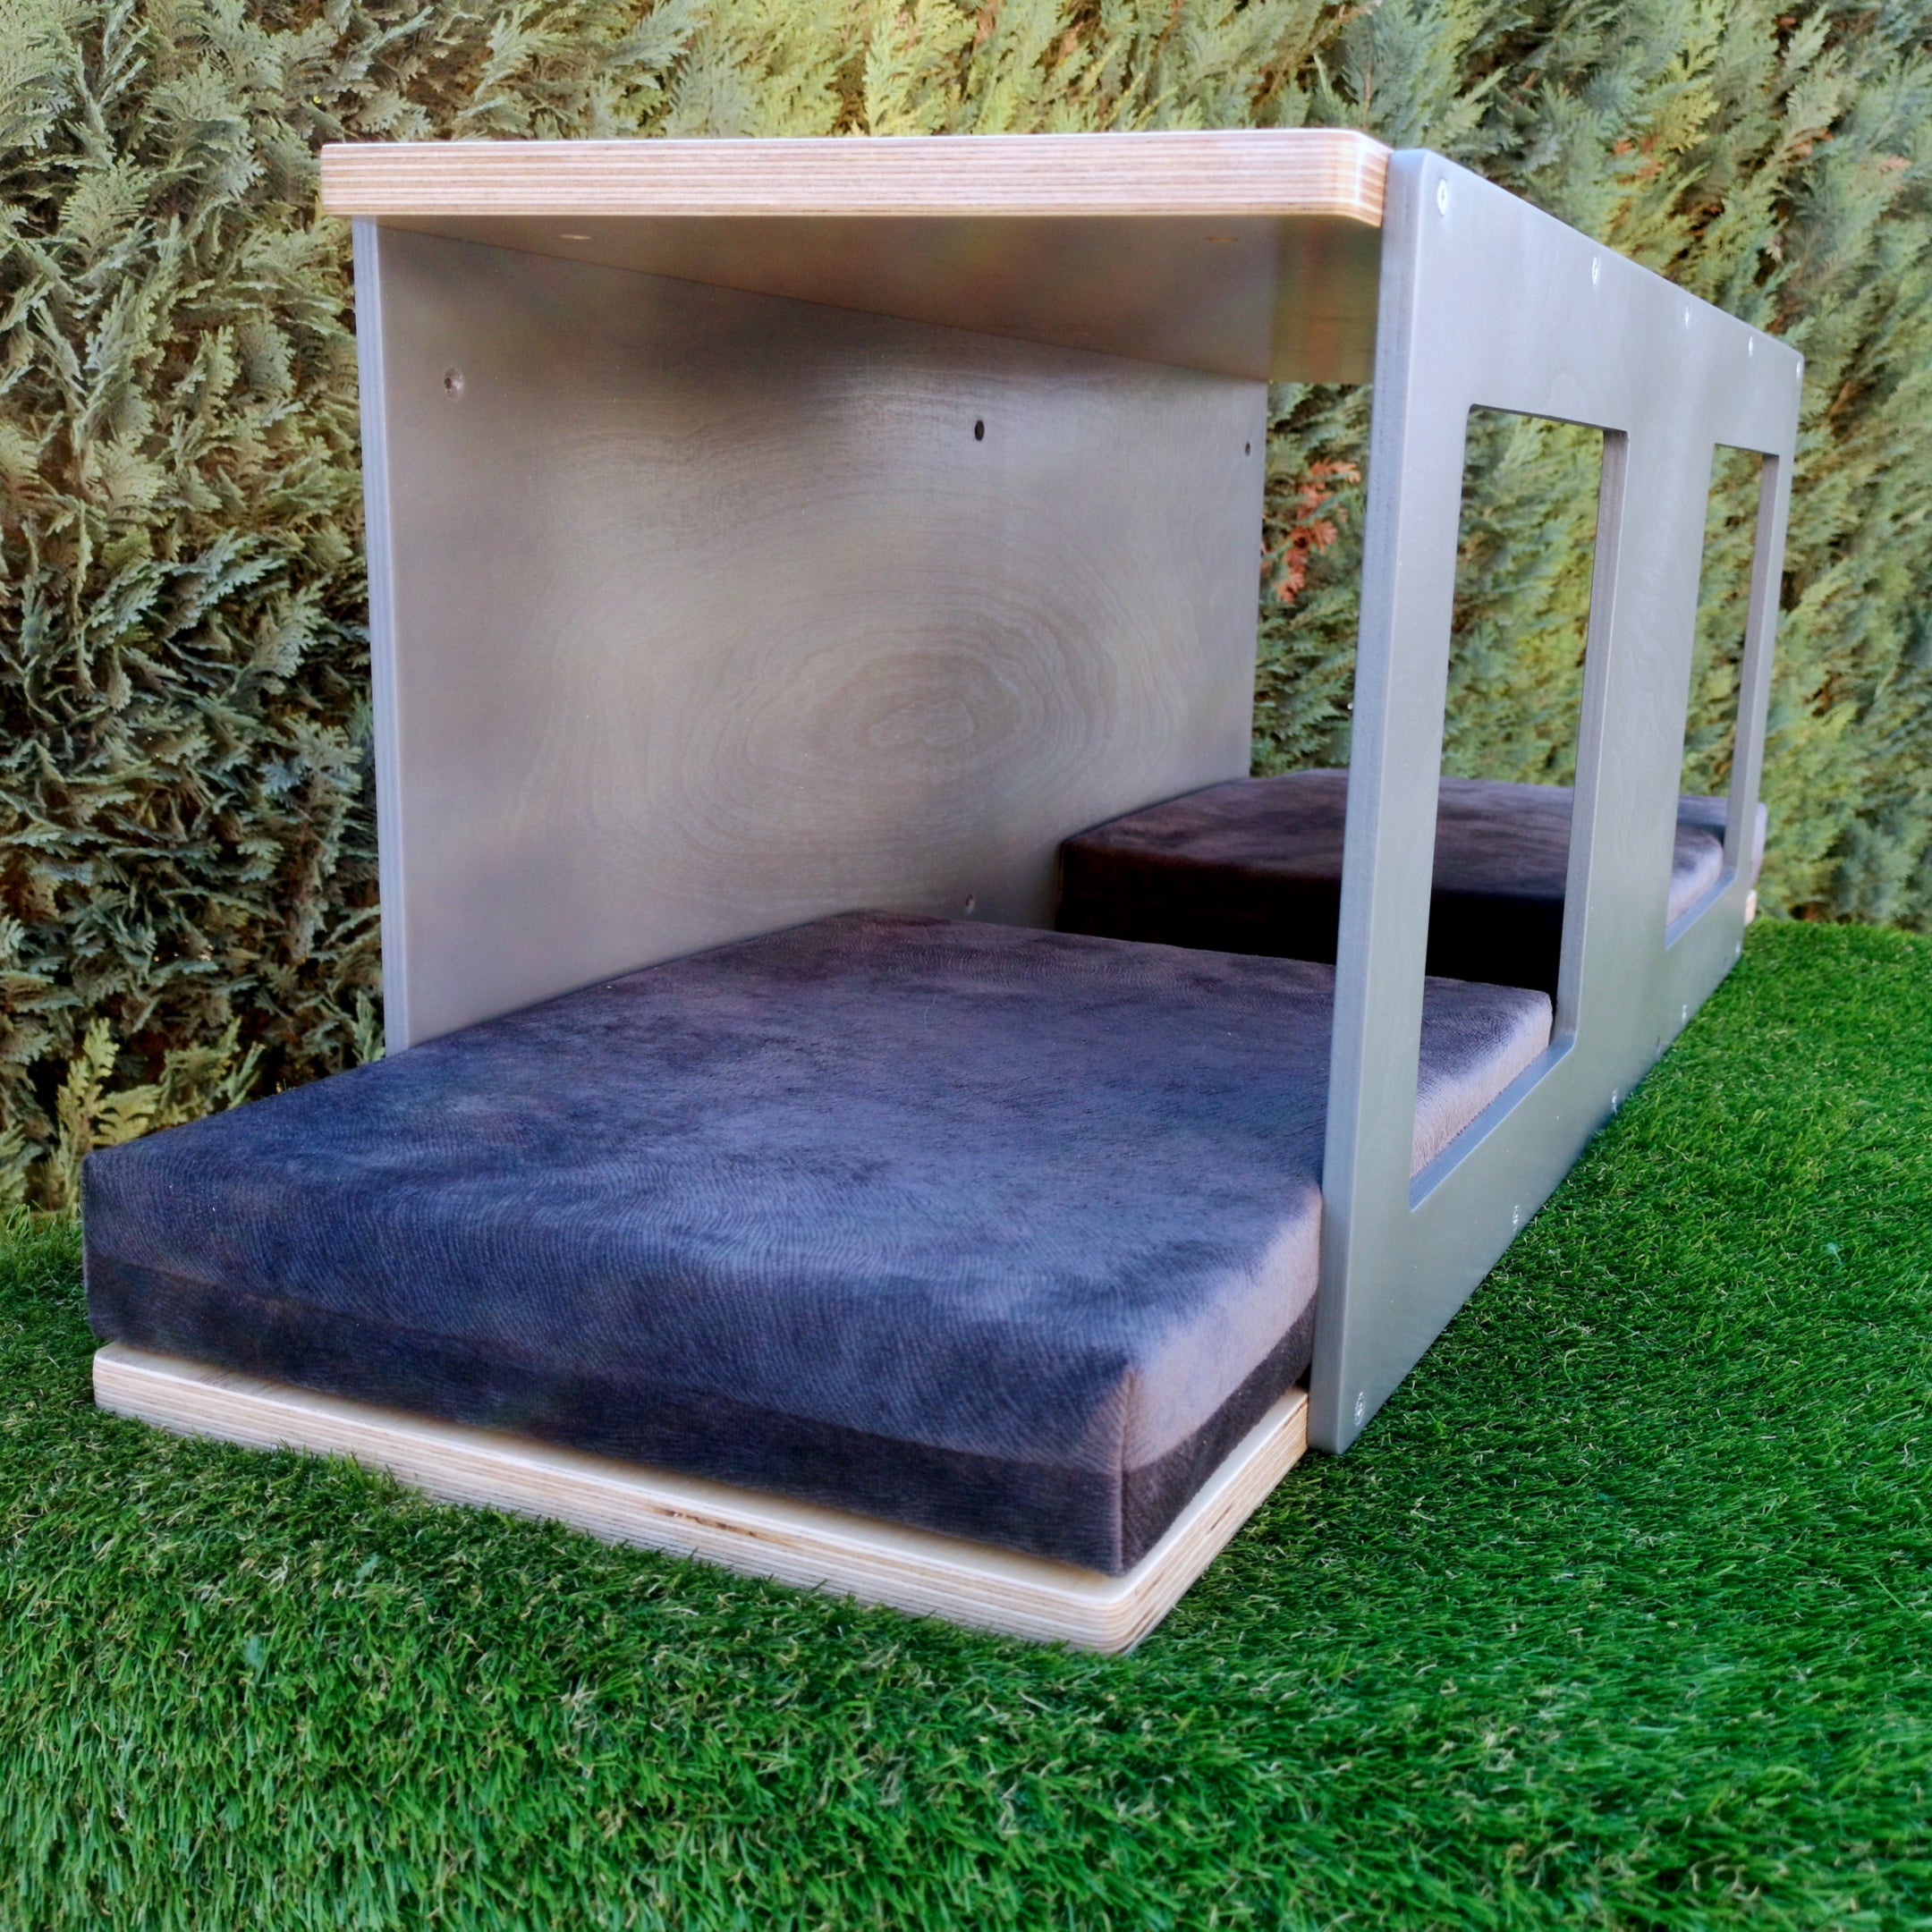 Cat Ceiling Shelf Bed - Wally Tunnel Top - Scratchy Things Premium Pet Furniture